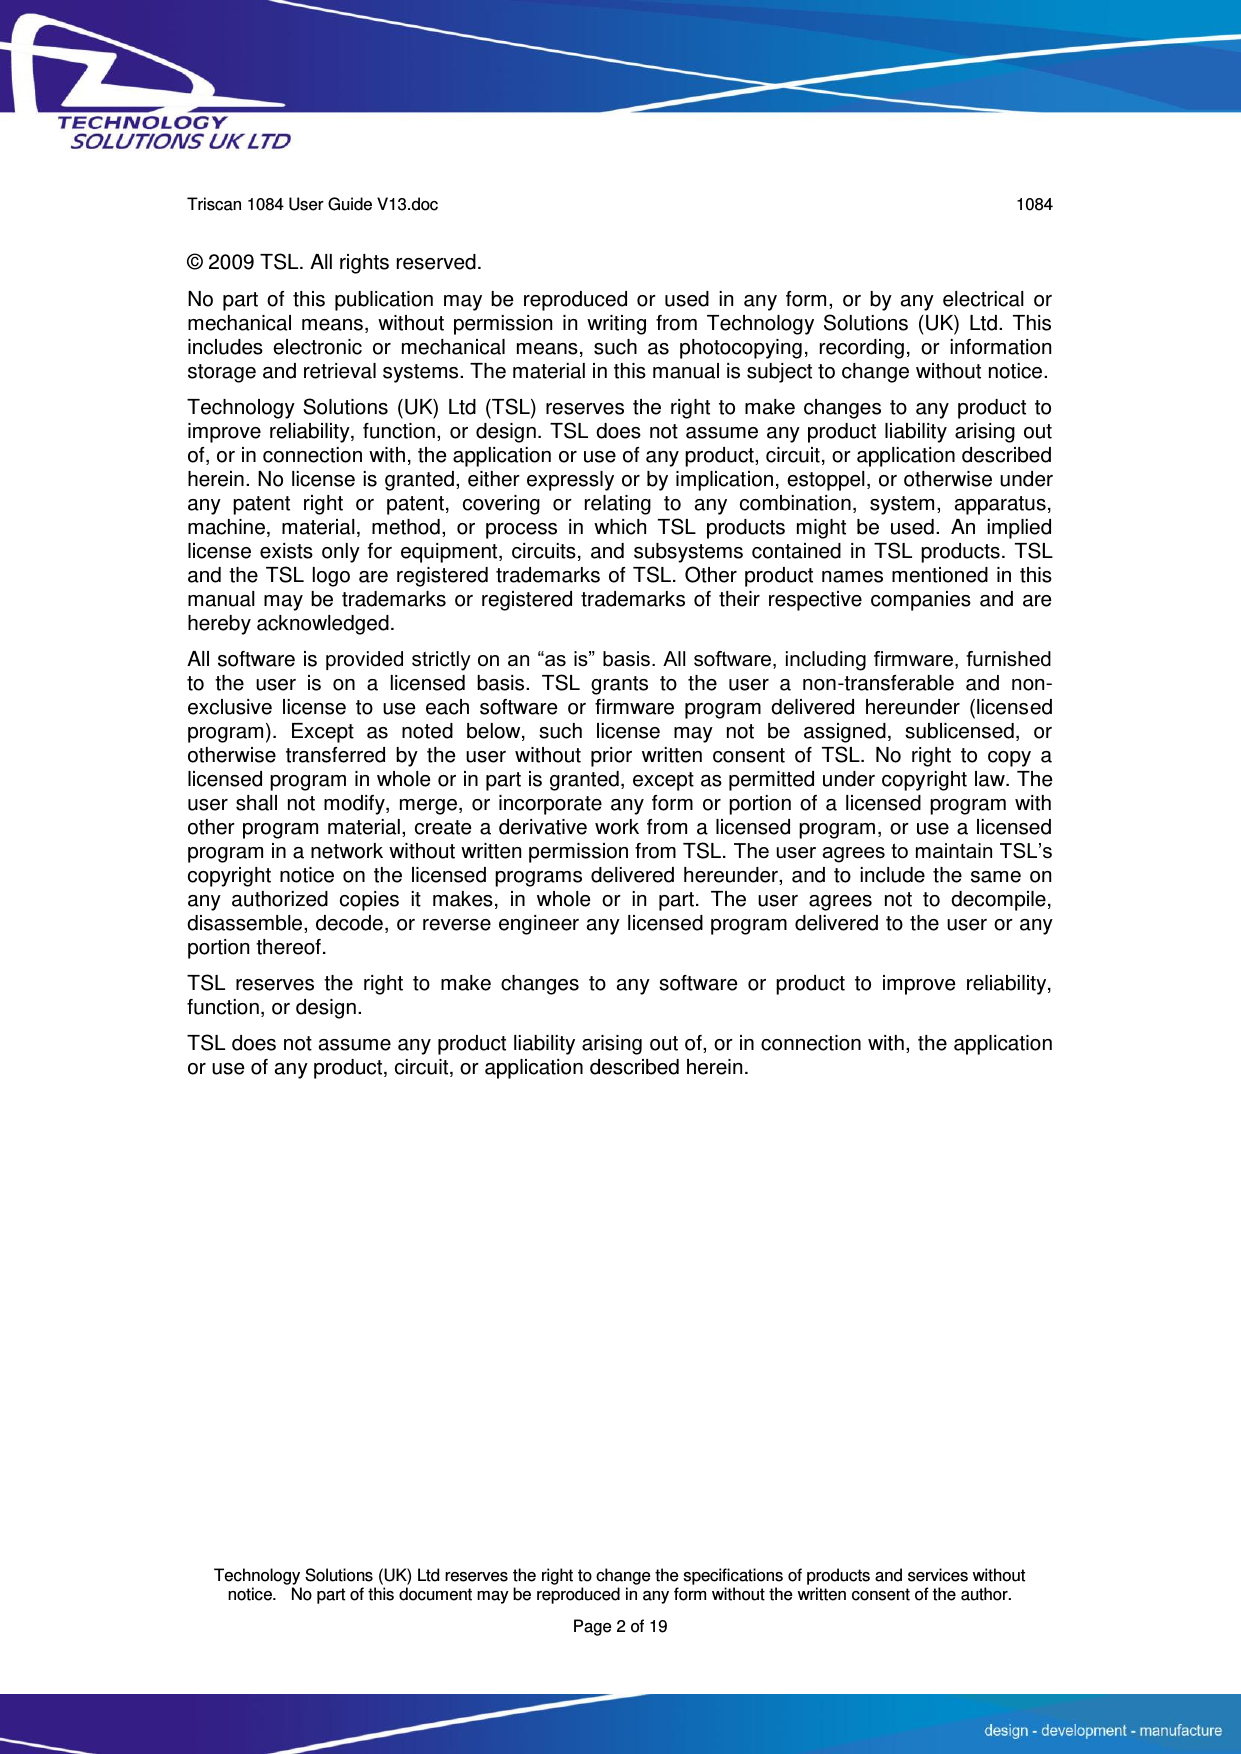      Triscan 1084 User Guide V13.doc   1084  Technology Solutions (UK) Ltd reserves the right to change the specifications of products and services without notice.   No part of this document may be reproduced in any form without the written consent of the author. Page 2 of 19 © 2009 TSL. All rights reserved. No part of  this publication  may be reproduced  or used  in any form,  or  by any electrical or mechanical means,  without permission in  writing  from Technology Solutions (UK)  Ltd. This includes  electronic  or  mechanical  means,  such  as  photocopying,  recording,  or  information storage and retrieval systems. The material in this manual is subject to change without notice. Technology Solutions (UK) Ltd (TSL) reserves the right to make changes to any product to improve reliability, function, or design. TSL does not assume any product liability arising out of, or in connection with, the application or use of any product, circuit, or application described herein. No license is granted, either expressly or by implication, estoppel, or otherwise under any  patent  right  or  patent,  covering  or  relating  to  any  combination,  system,  apparatus, machine,  material,  method,  or  process  in  which  TSL  products  might  be  used.  An  implied license exists only for equipment, circuits, and subsystems contained in TSL products. TSL and the TSL logo are registered trademarks of TSL. Other product names mentioned in this manual may be trademarks or registered trademarks of their respective companies and are hereby acknowledged. All software is provided strictly on an “as is” basis. All software, including firmware, furnished to  the  user  is  on  a  licensed  basis.  TSL  grants  to  the  user  a  non-transferable  and  non-exclusive  license  to  use  each  software  or  firmware  program  delivered  hereunder  (licensed program).  Except  as  noted  below,  such  license  may  not  be  assigned,  sublicensed,  or otherwise  transferred  by  the  user  without  prior  written  consent  of  TSL.  No  right  to  copy  a licensed program in whole or in part is granted, except as permitted under copyright law. The user shall not modify, merge, or incorporate any form or portion of a licensed program with other program material, create a derivative work from a licensed program, or use a licensed program in a network without written permission from TSL. The user agrees to maintain TSL’s copyright notice on the licensed programs delivered hereunder, and to include the same on any  authorized  copies  it  makes,  in  whole  or  in  part.  The  user  agrees  not  to  decompile, disassemble, decode, or reverse engineer any licensed program delivered to the user or any portion thereof. TSL  reserves  the  right  to  make  changes  to  any  software  or  product  to  improve  reliability, function, or design. TSL does not assume any product liability arising out of, or in connection with, the application or use of any product, circuit, or application described herein. 